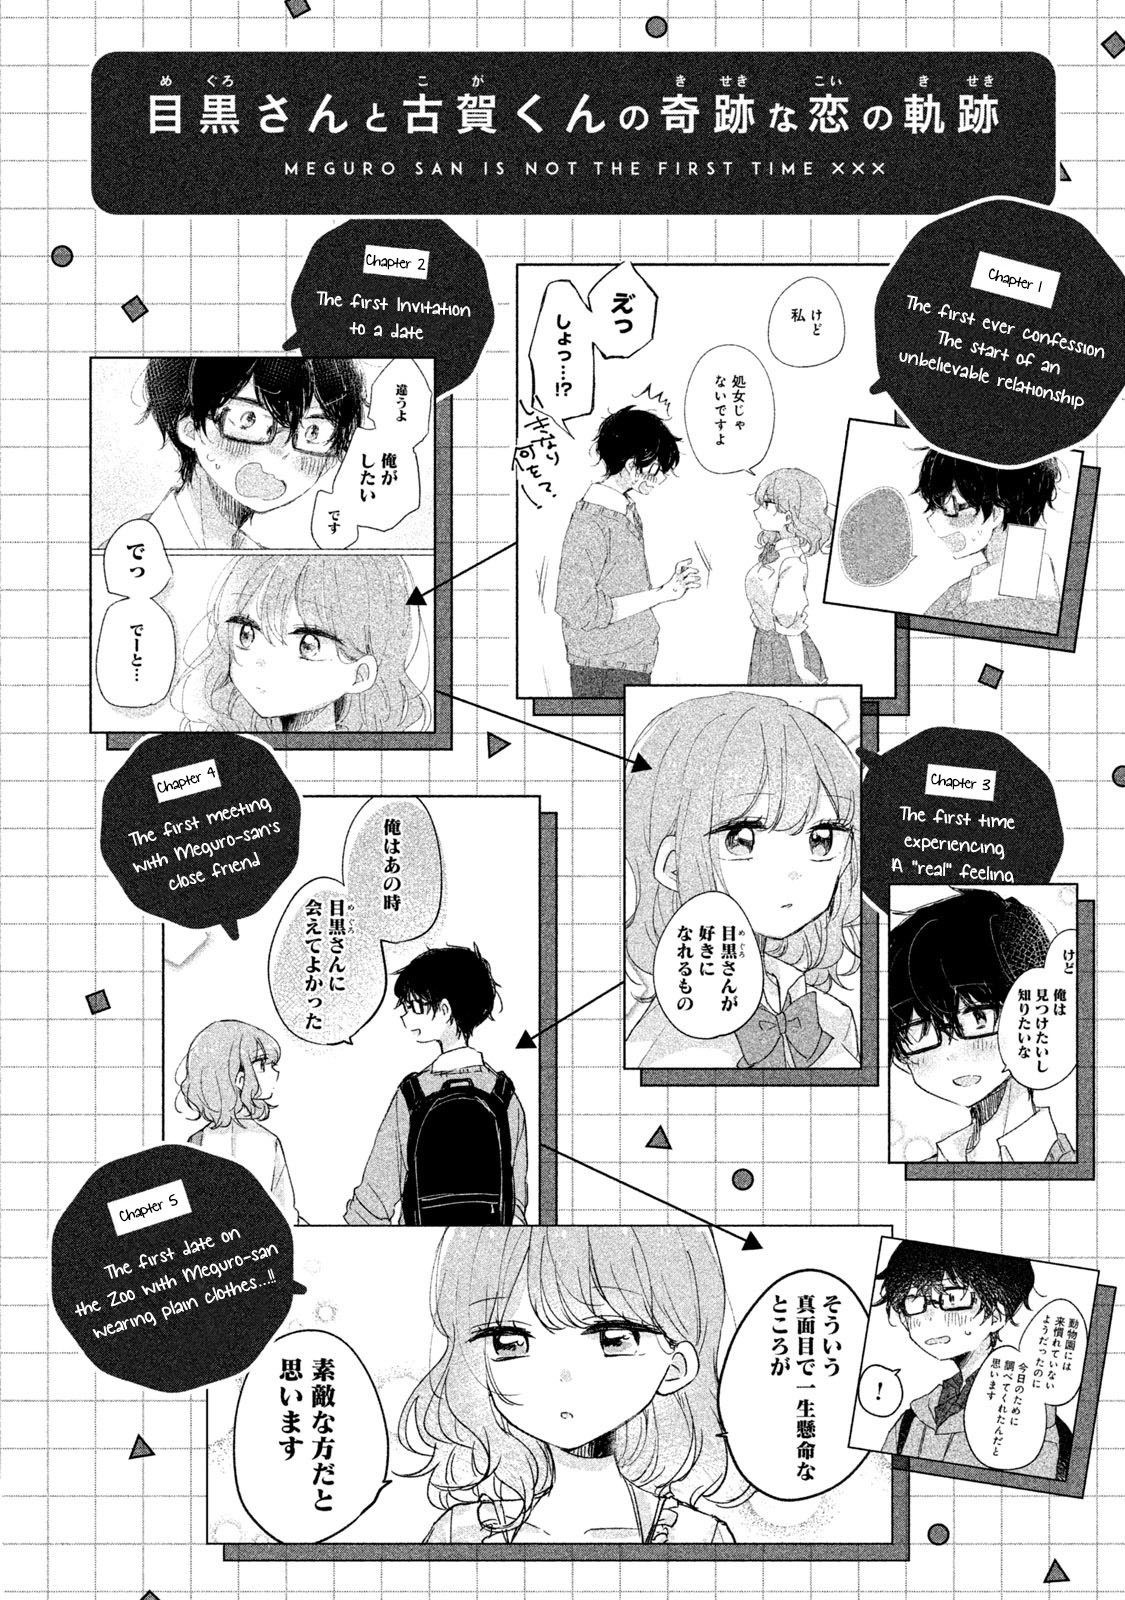 It's Not Meguro san's First Time Vol. 2 Ch. 11 A Normal Thing